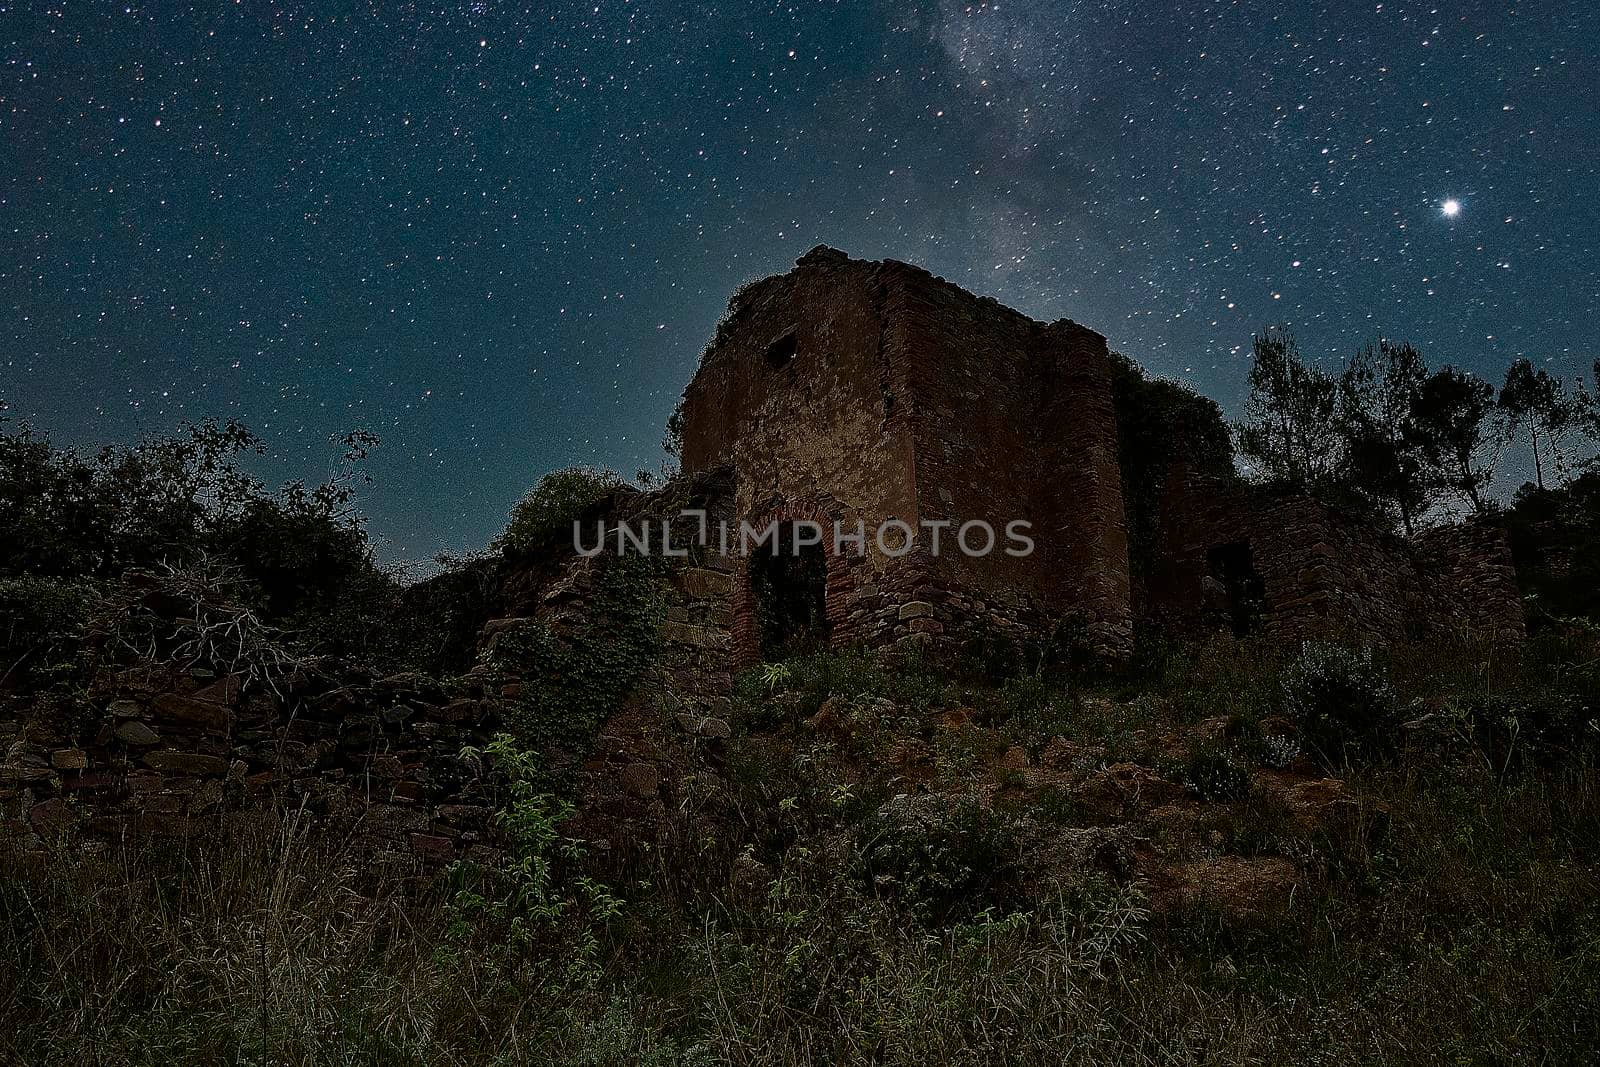 Jinquer, Castellon Spain.Milky Way over an abandoned and destroyed church by raul_ruiz